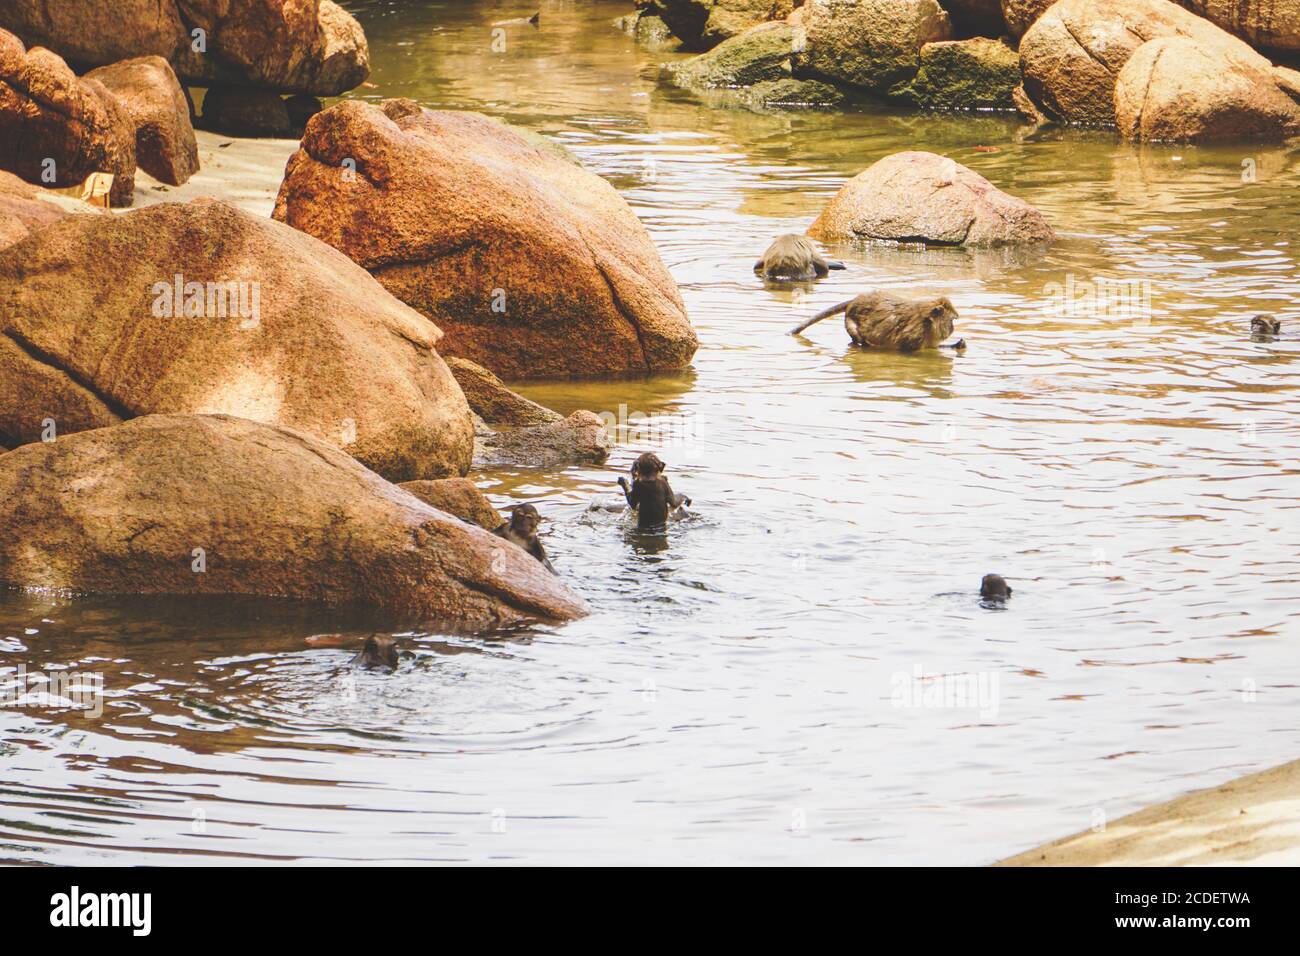 A group of Monkey in action swimming playing with water a wildlife park. Stock Photo